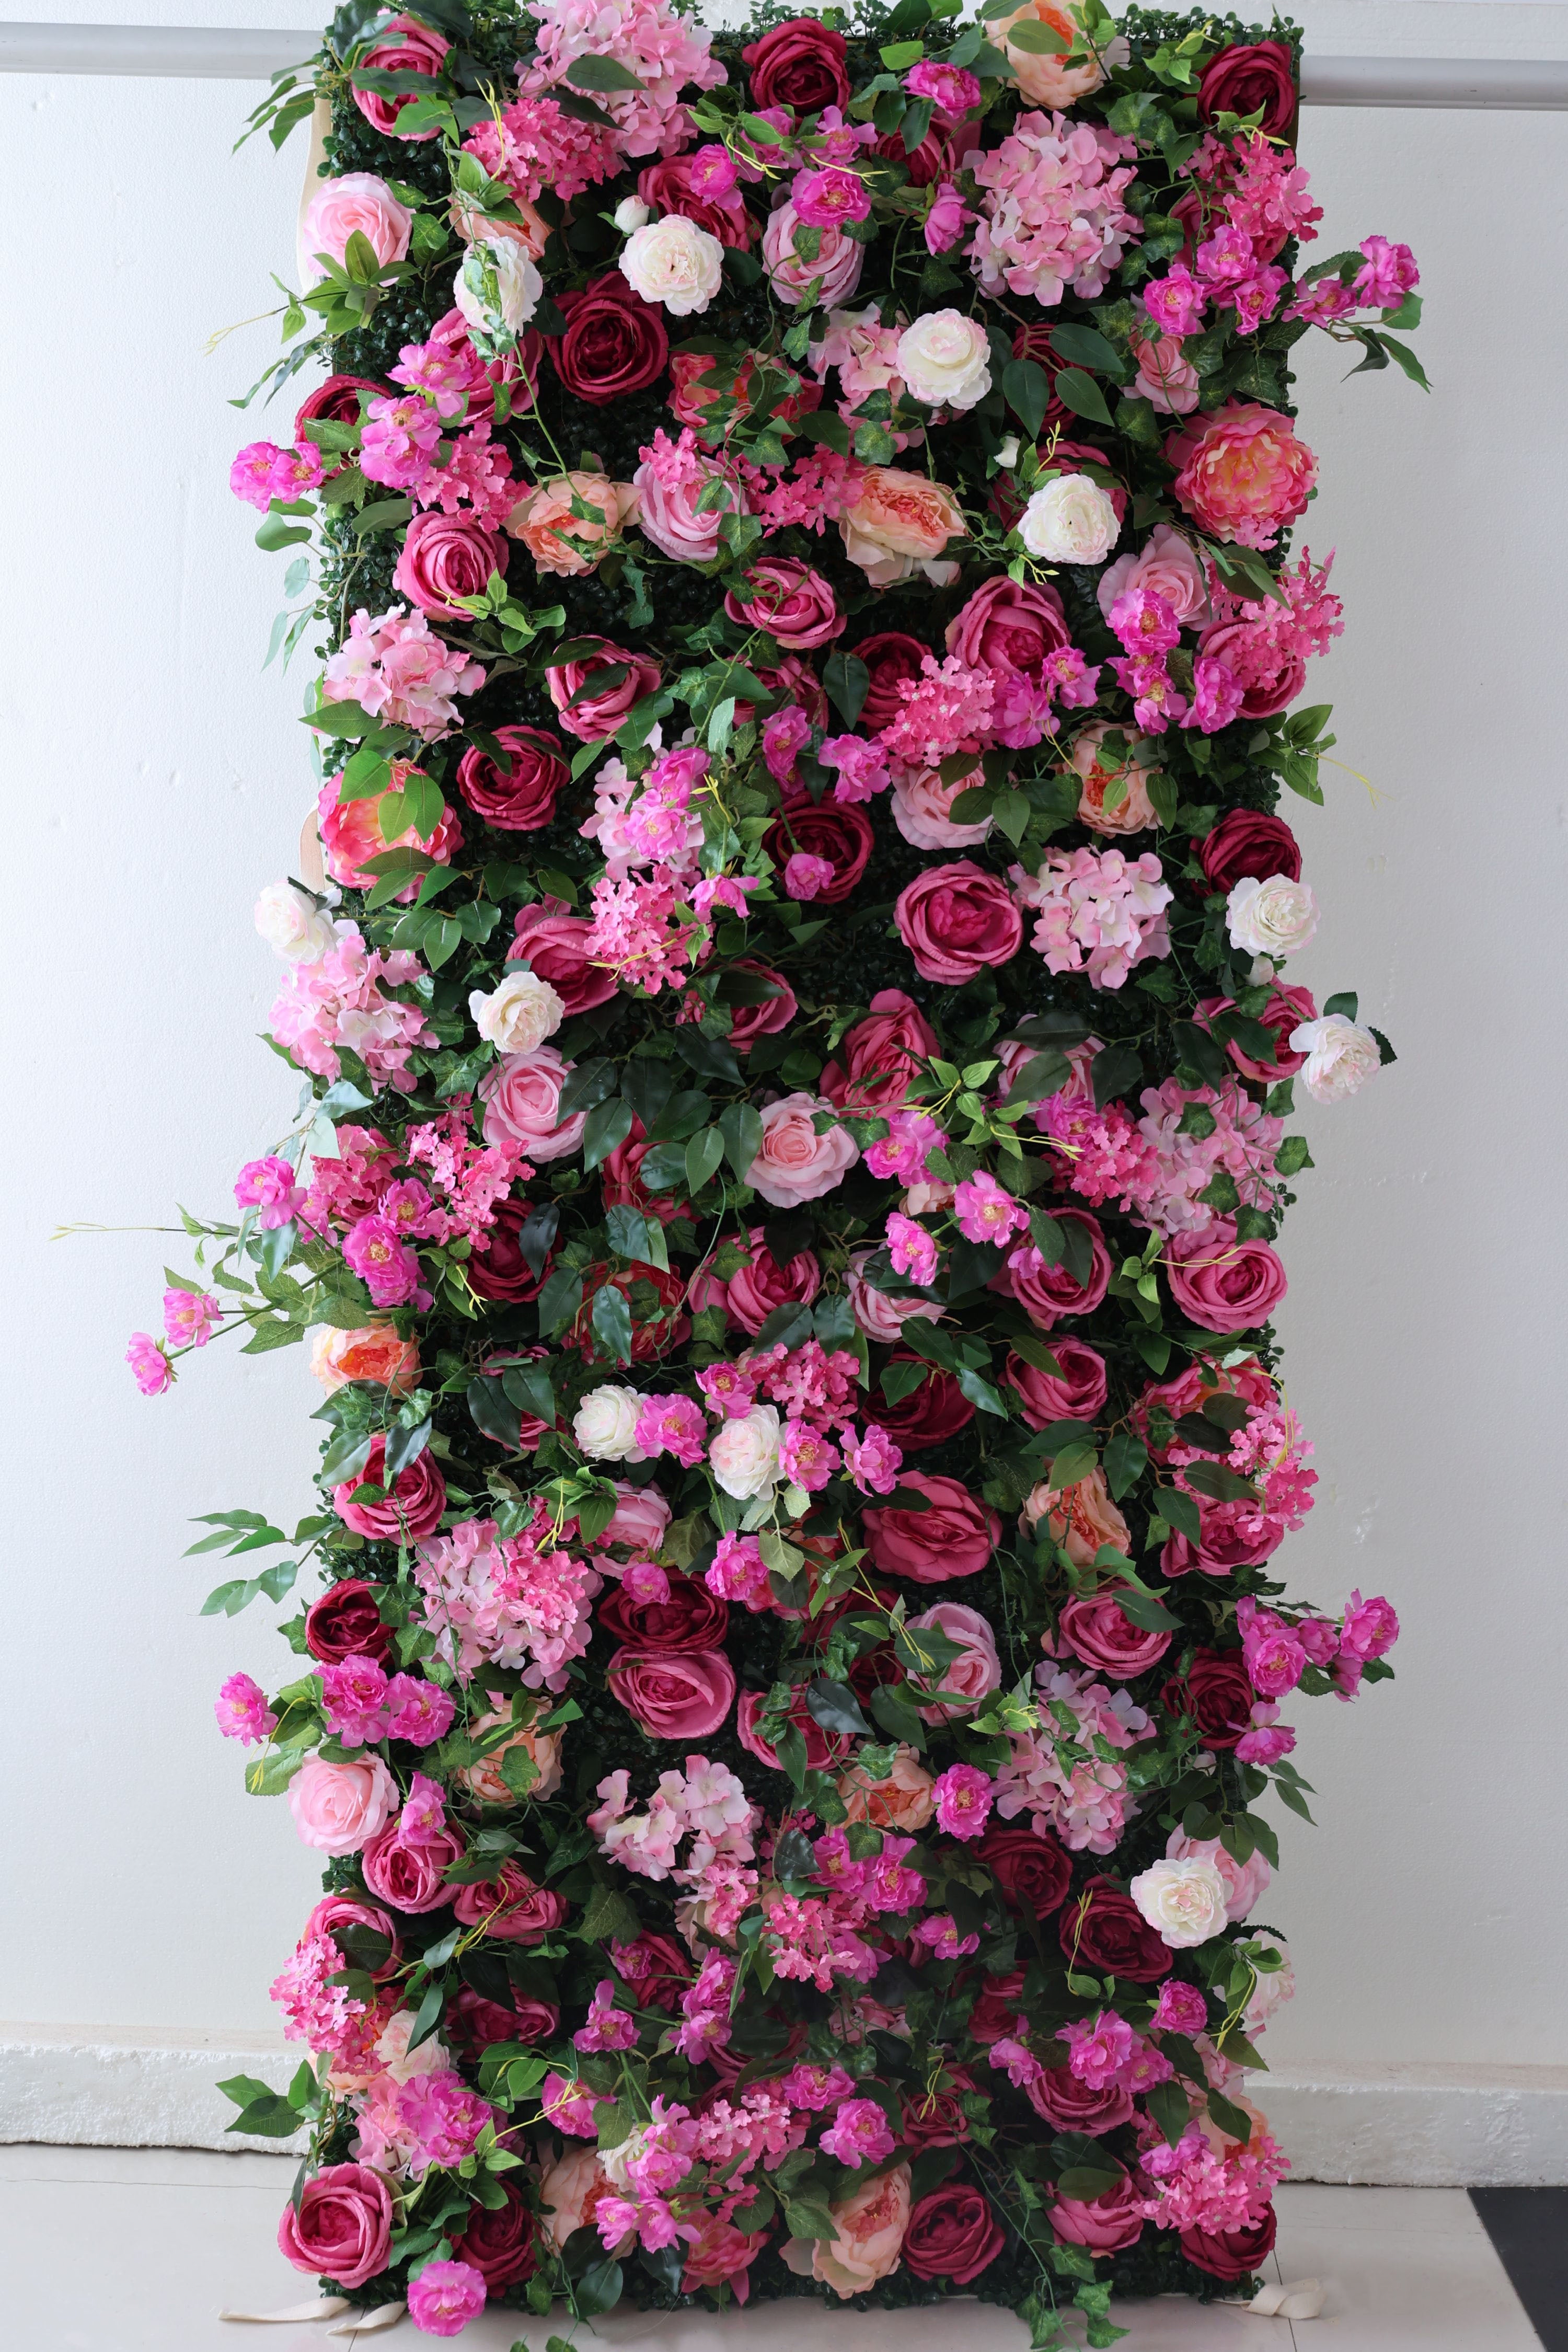 Valar Flowers RollValar Flower Roll Up Fabric Artificial Flower Wall Wedding Backdrop, Floral Party Decor, Event Photography